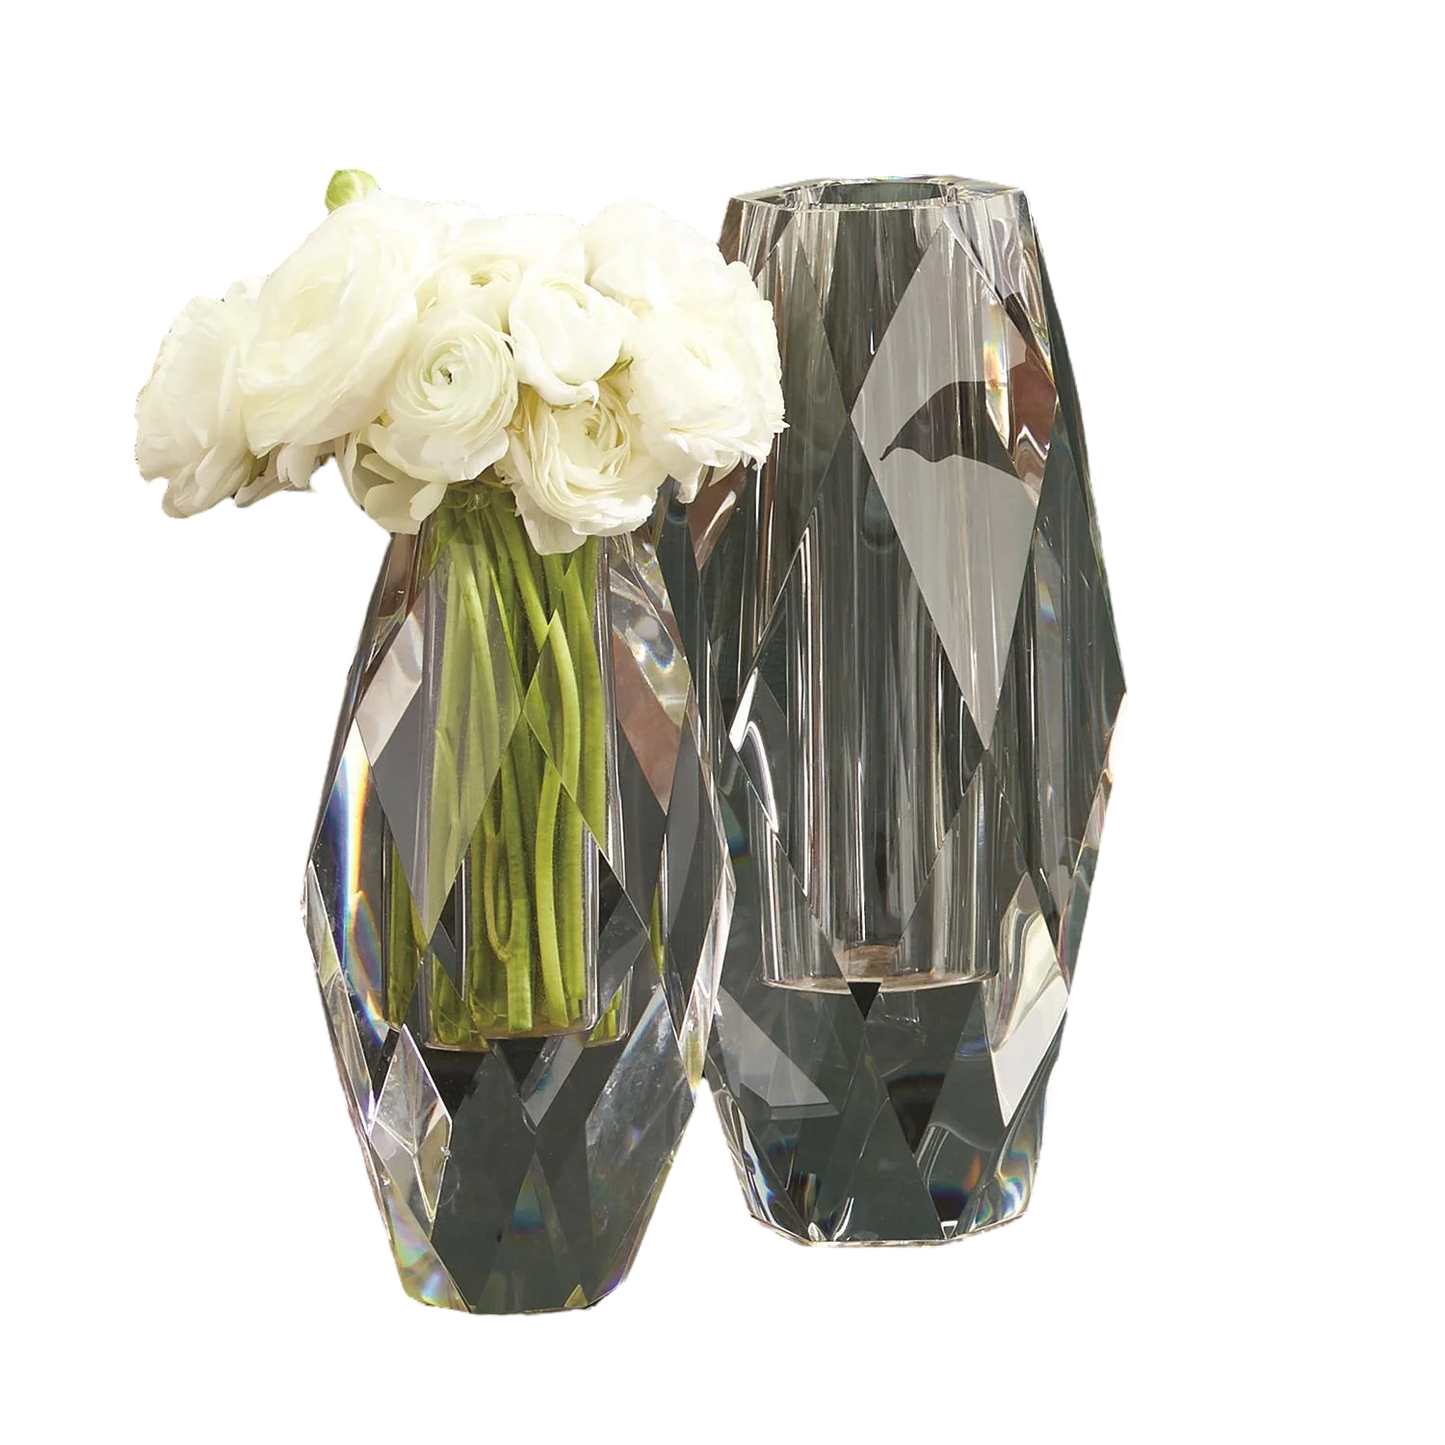 Grand Crystal Faceted Vases